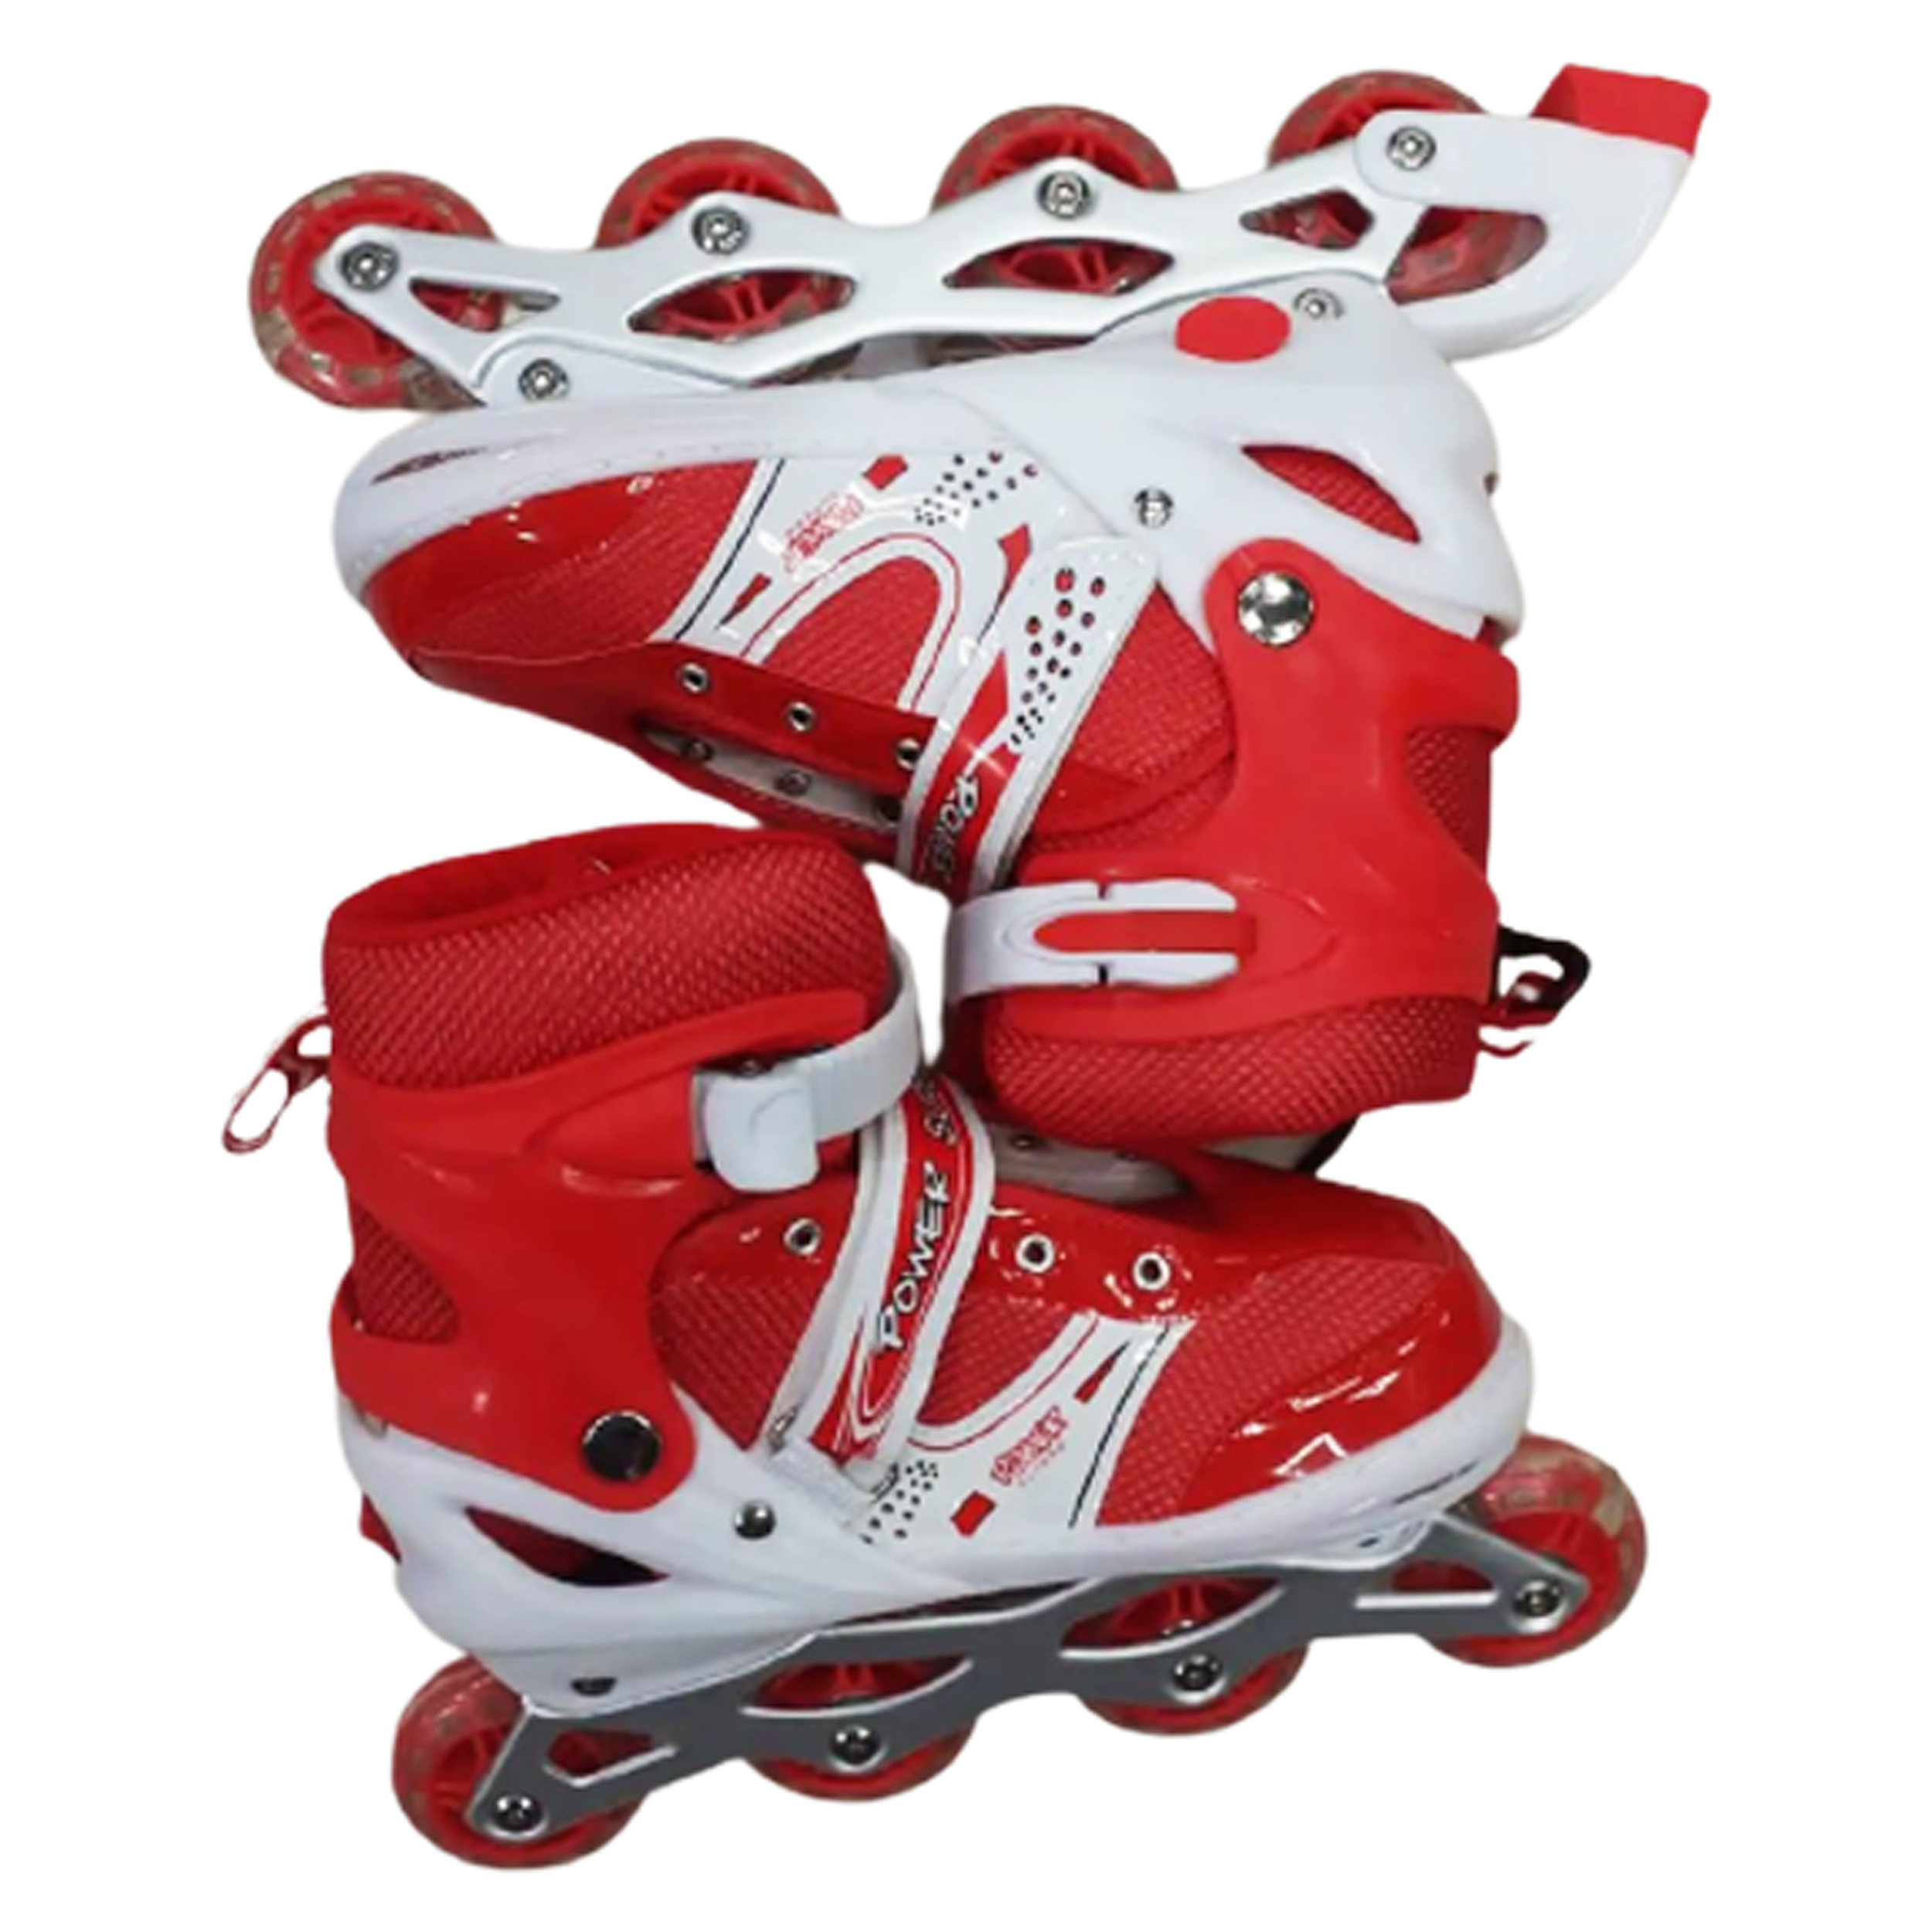 Inline roller skates shoes Red & White -1 Pair- Size (35-38)